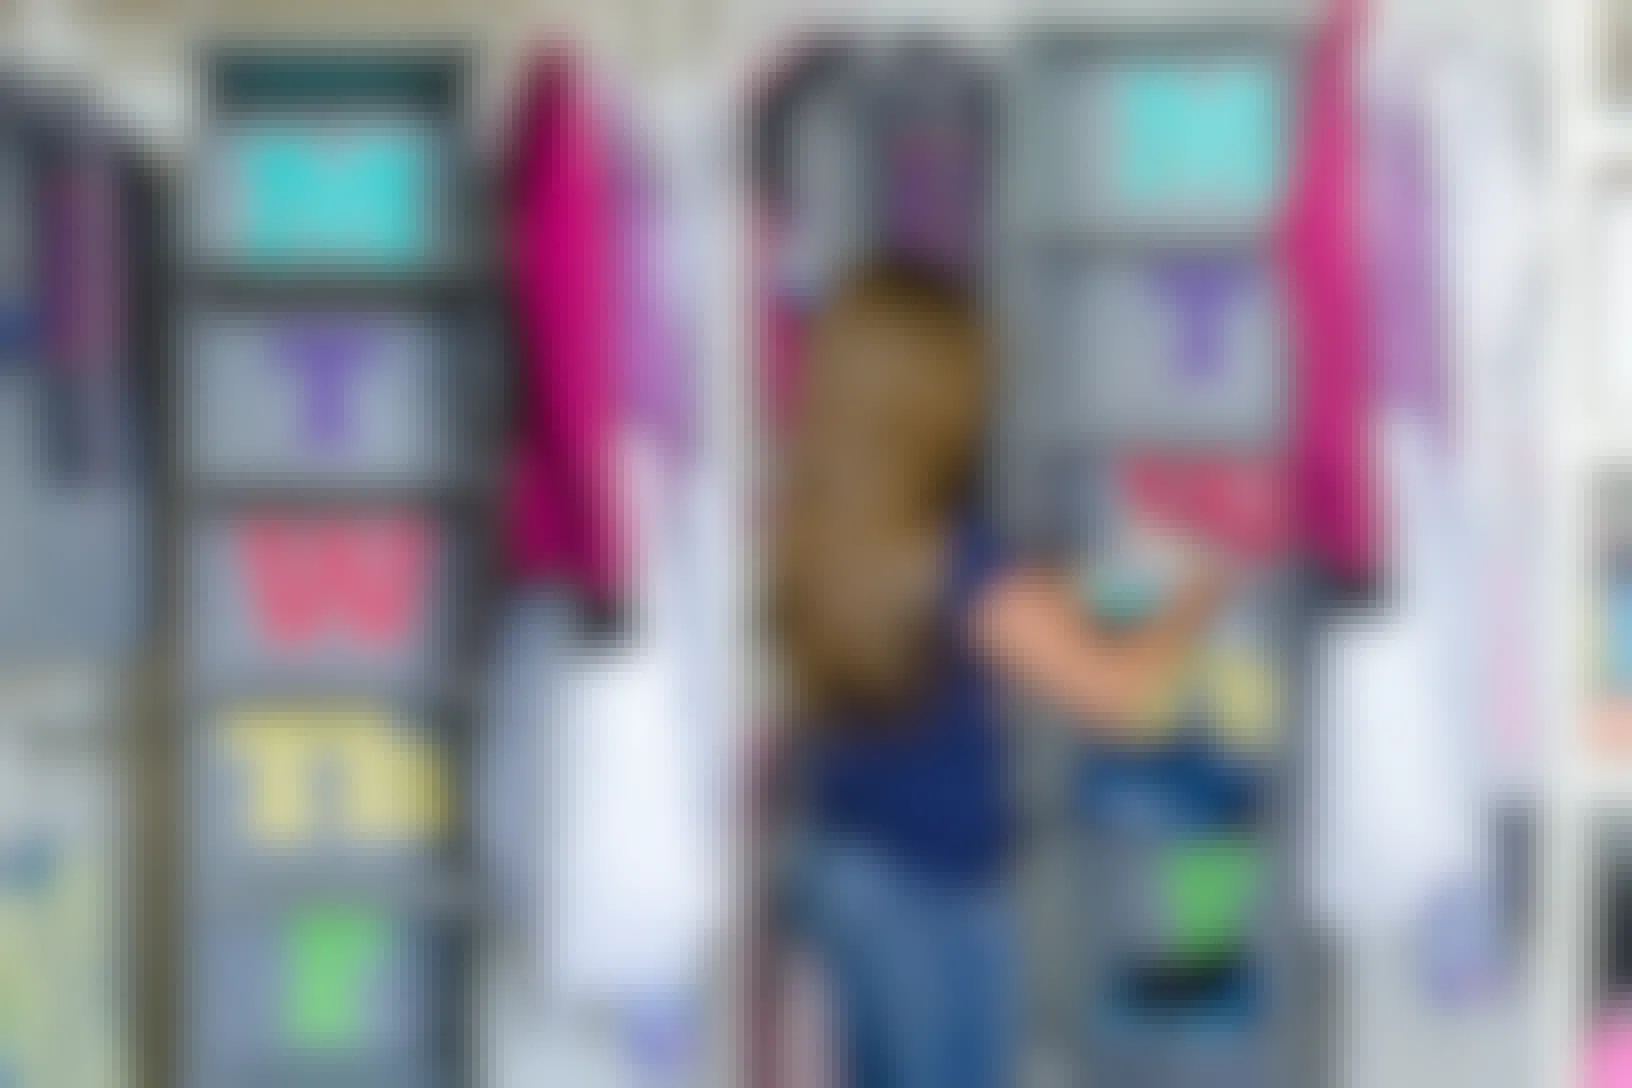 A girl placing clothes in a hanging closet organizer with the cubbies labeled for each day of the week.